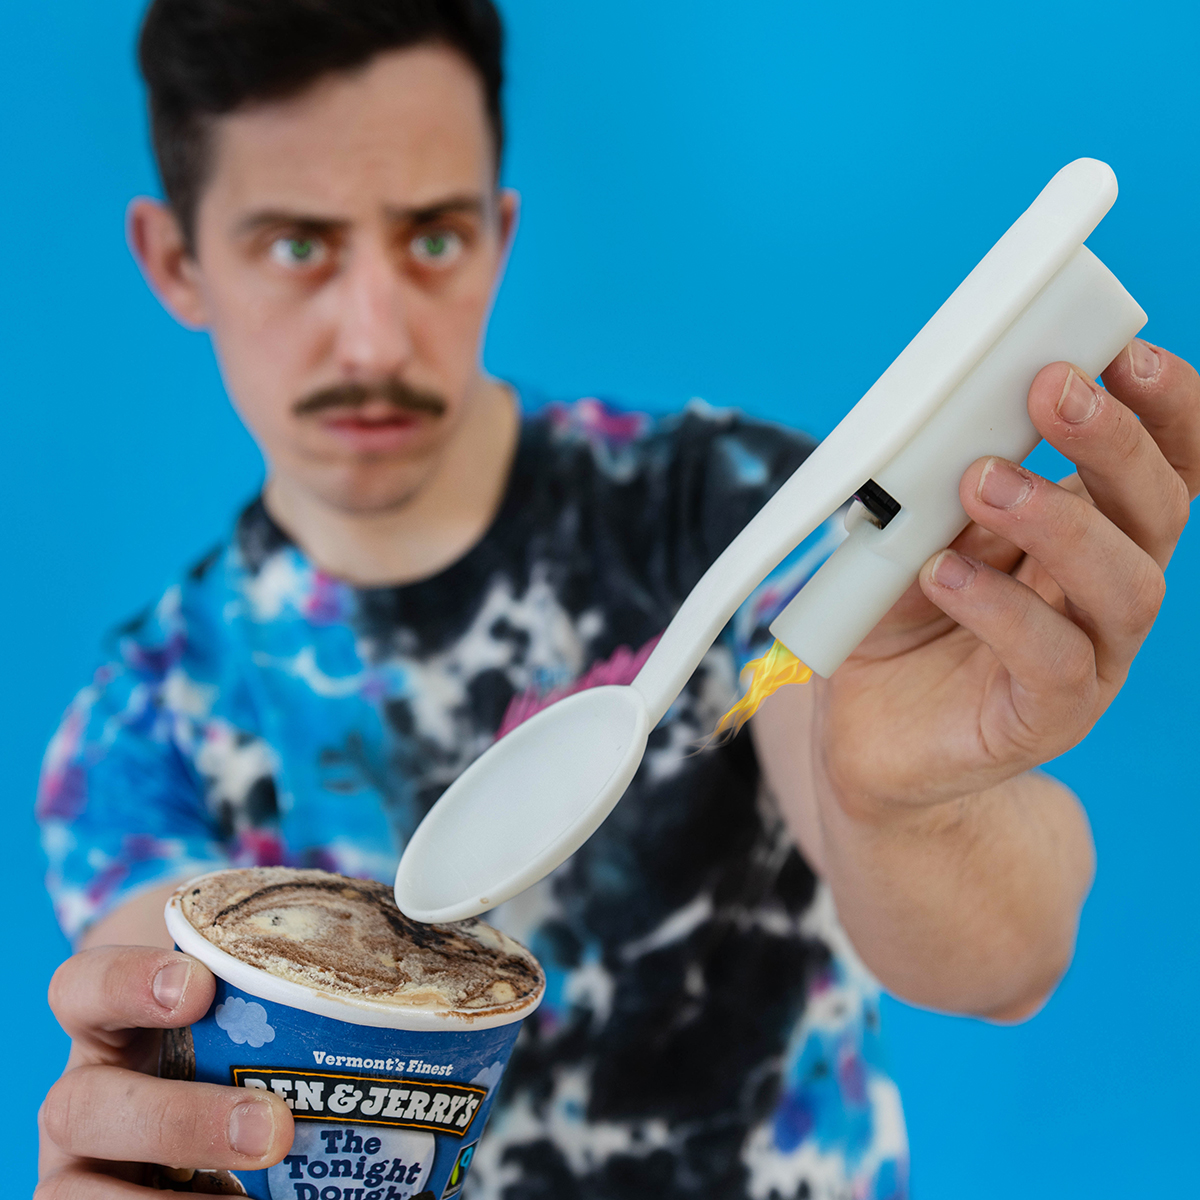 https://unnecessaryinventions.com/wp-content/uploads/2021/06/ice-cream-spoon-small.jpg